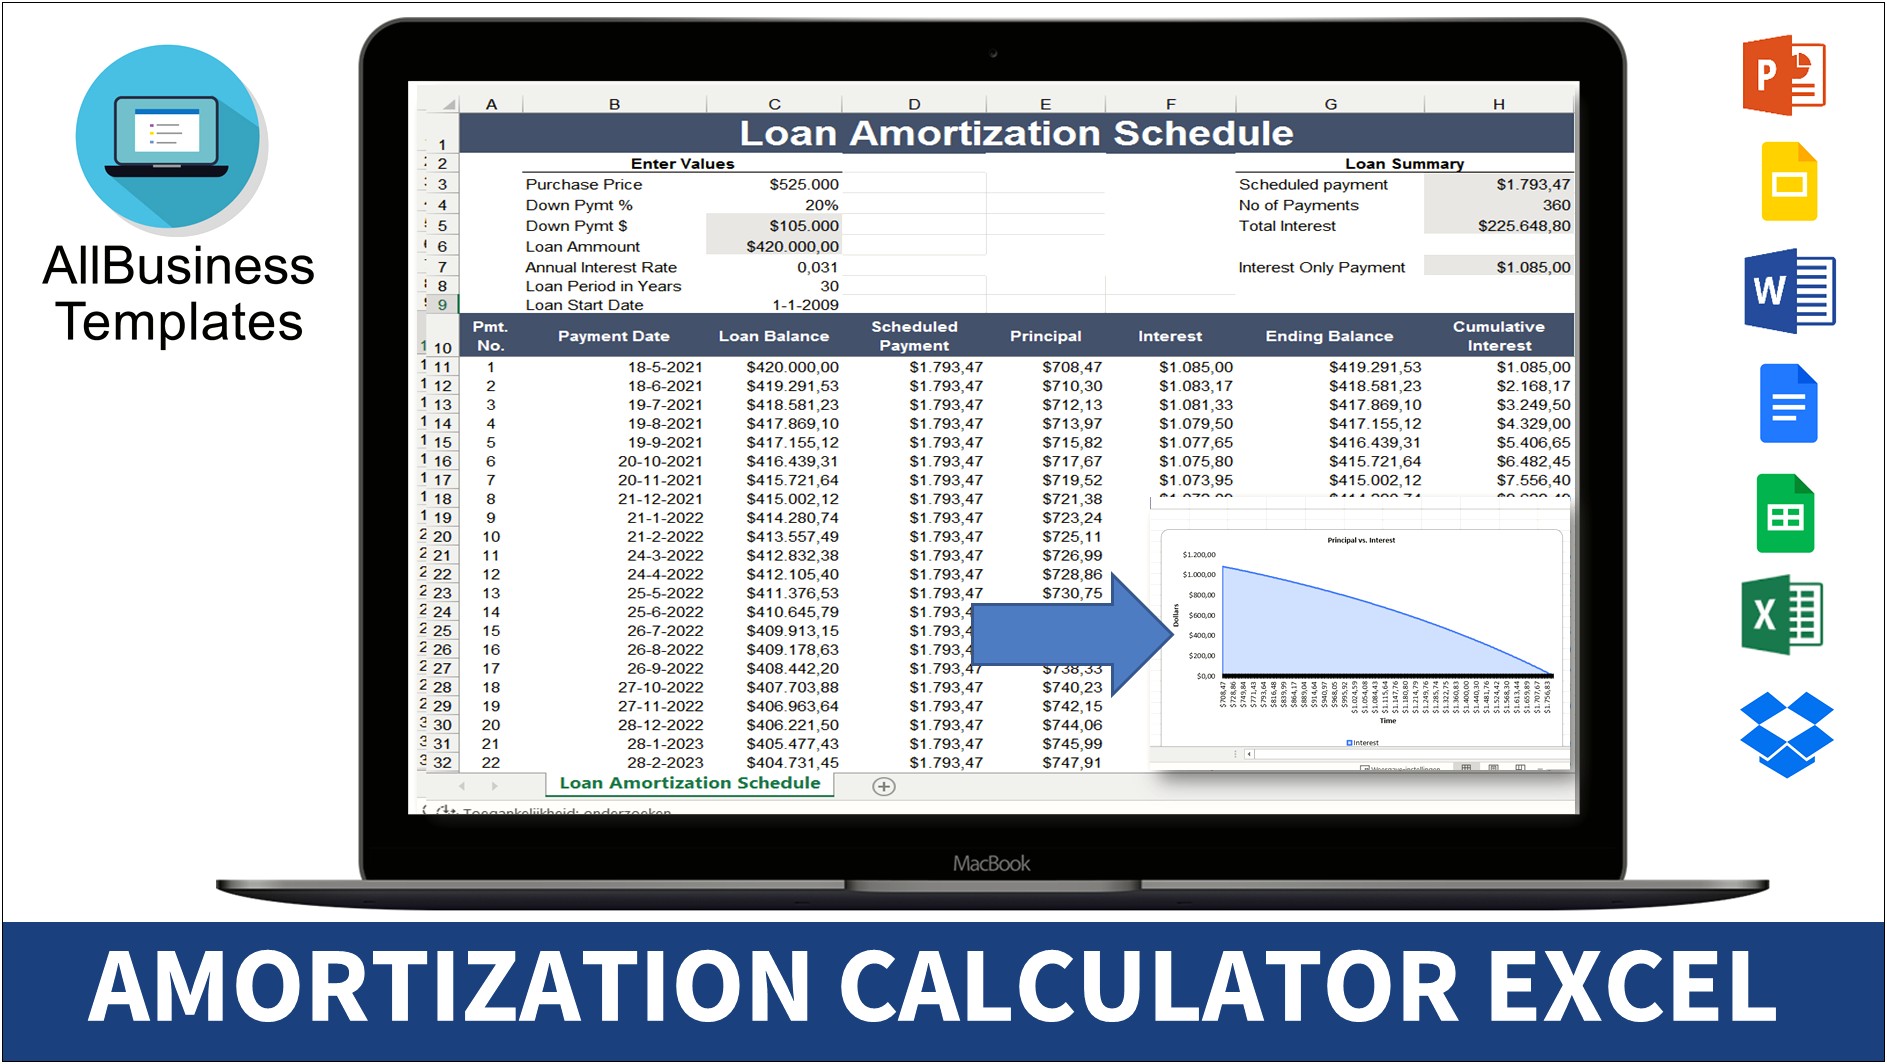 Loan Amortization Template Excel 2010 Download